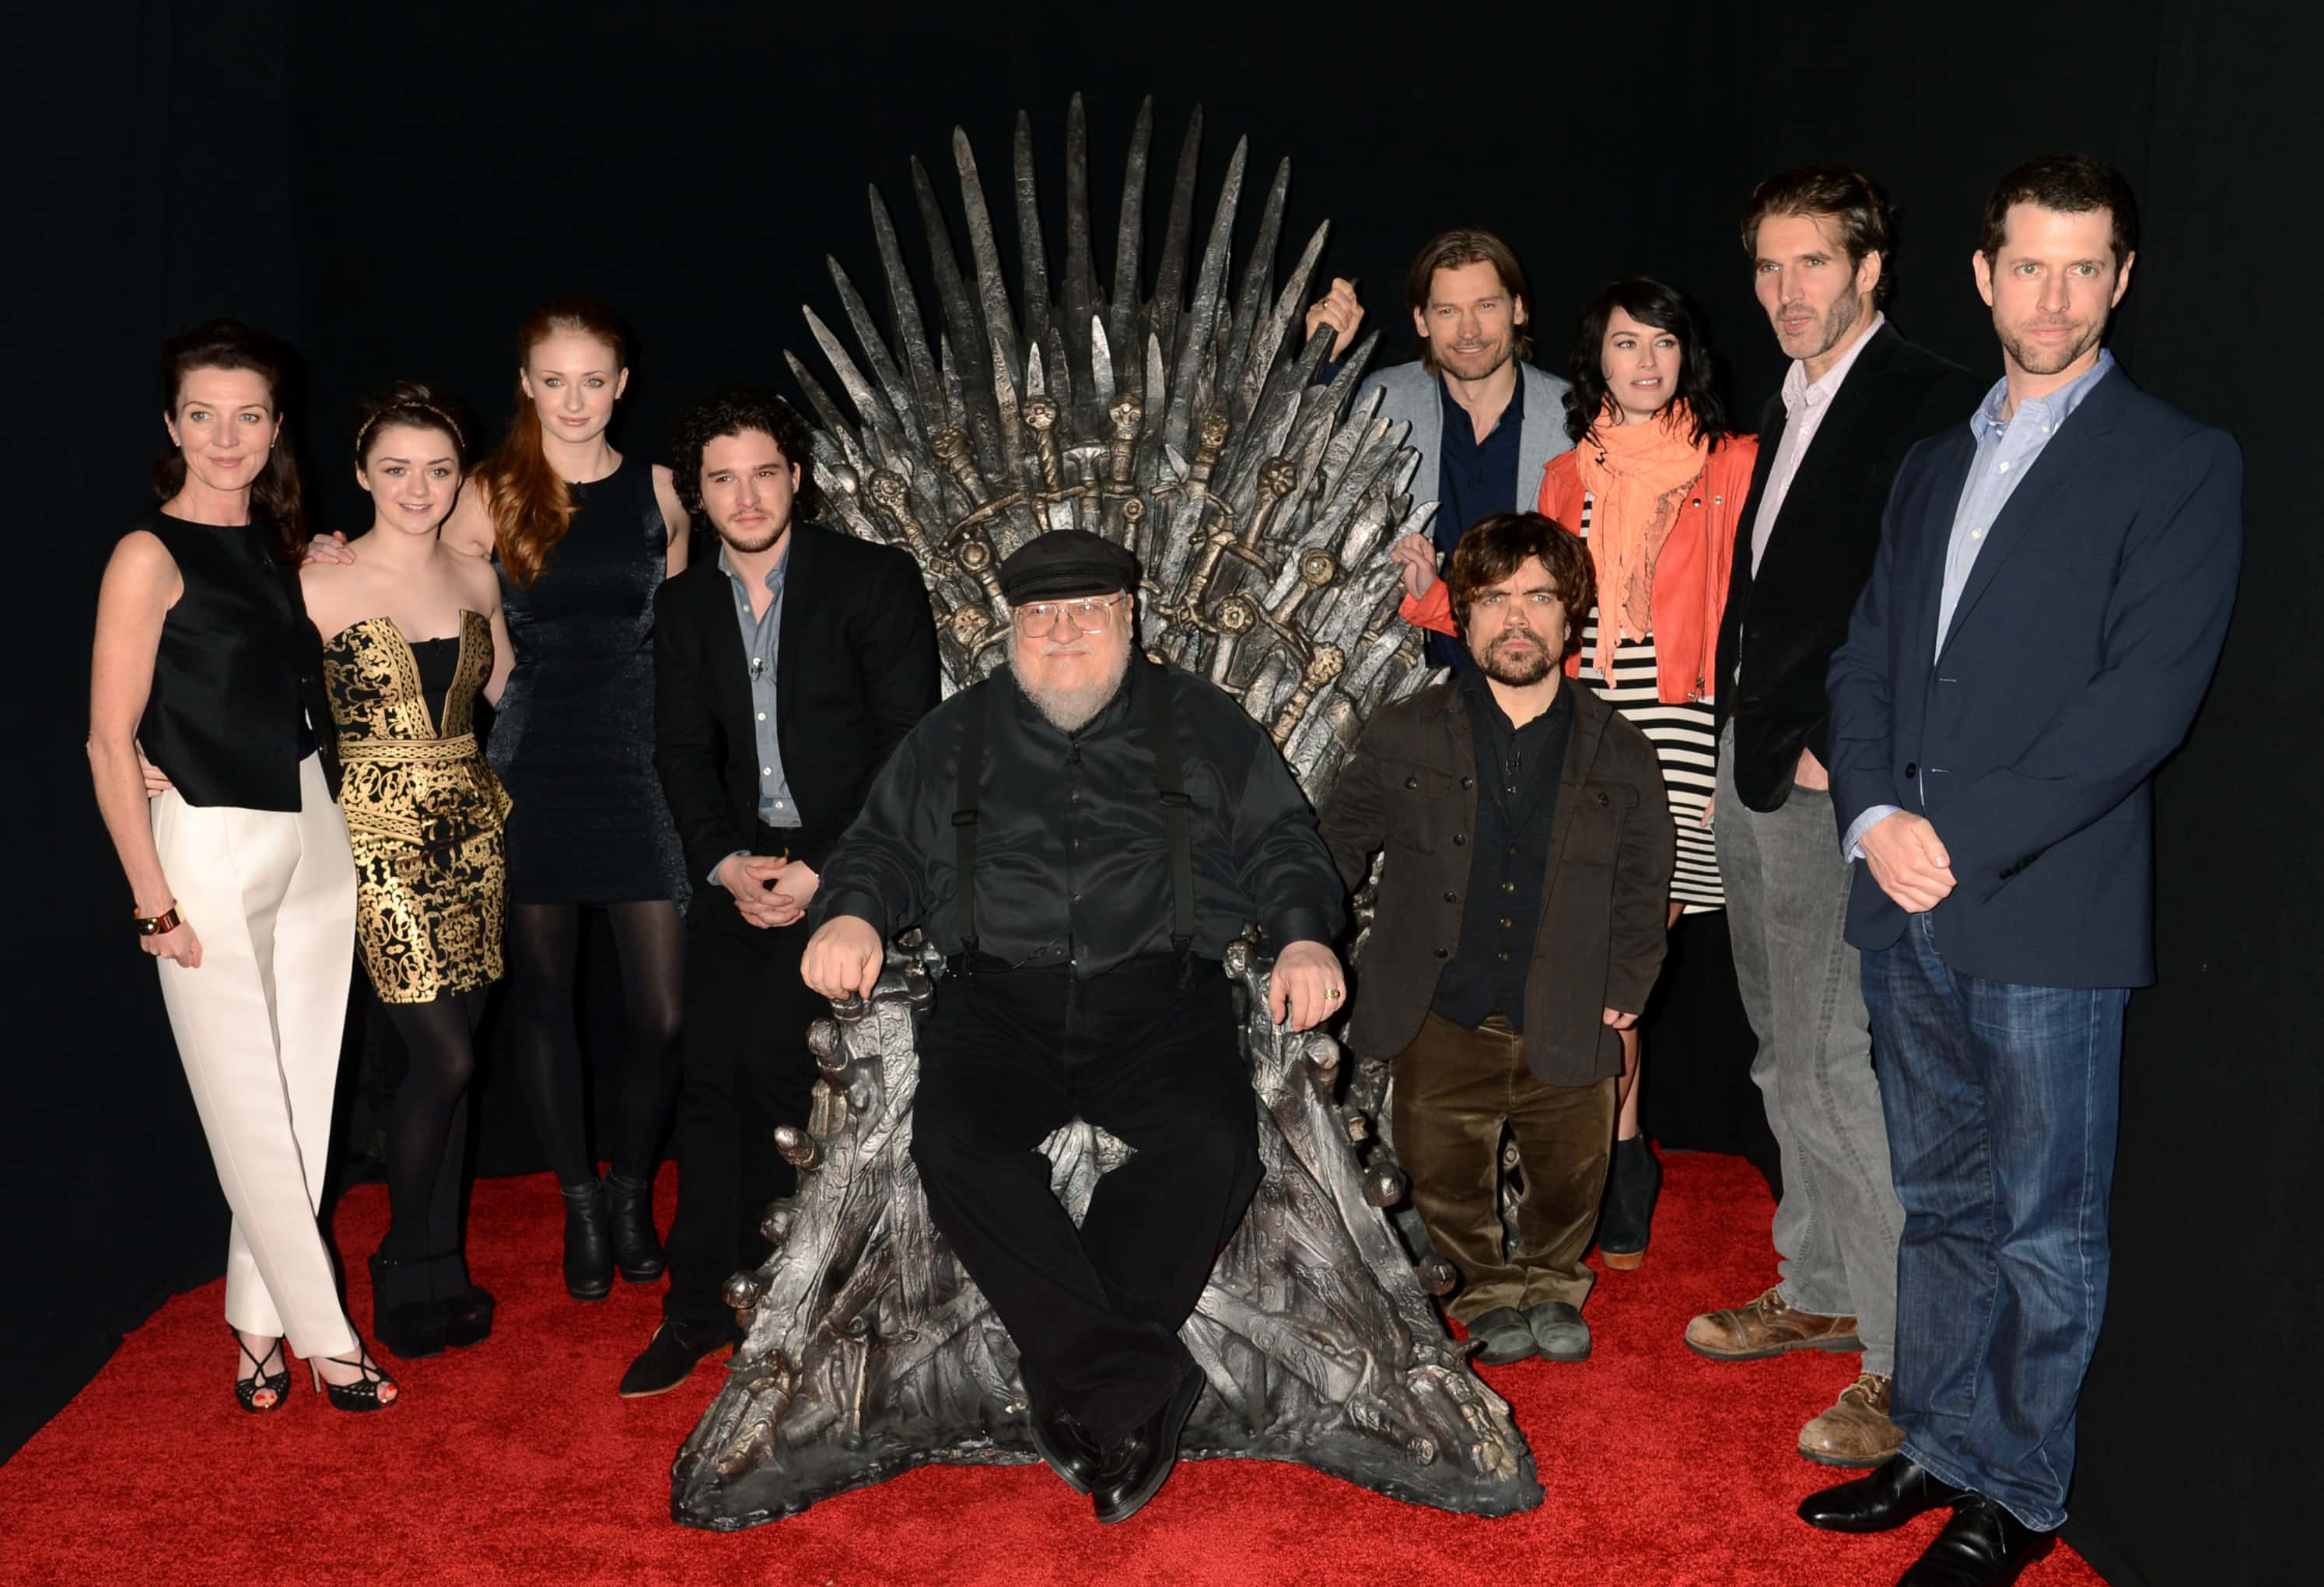 Academy Of Television Arts & Sciences Presents An Evening With HBO's 'Game Of Thrones' - Red Carpet.